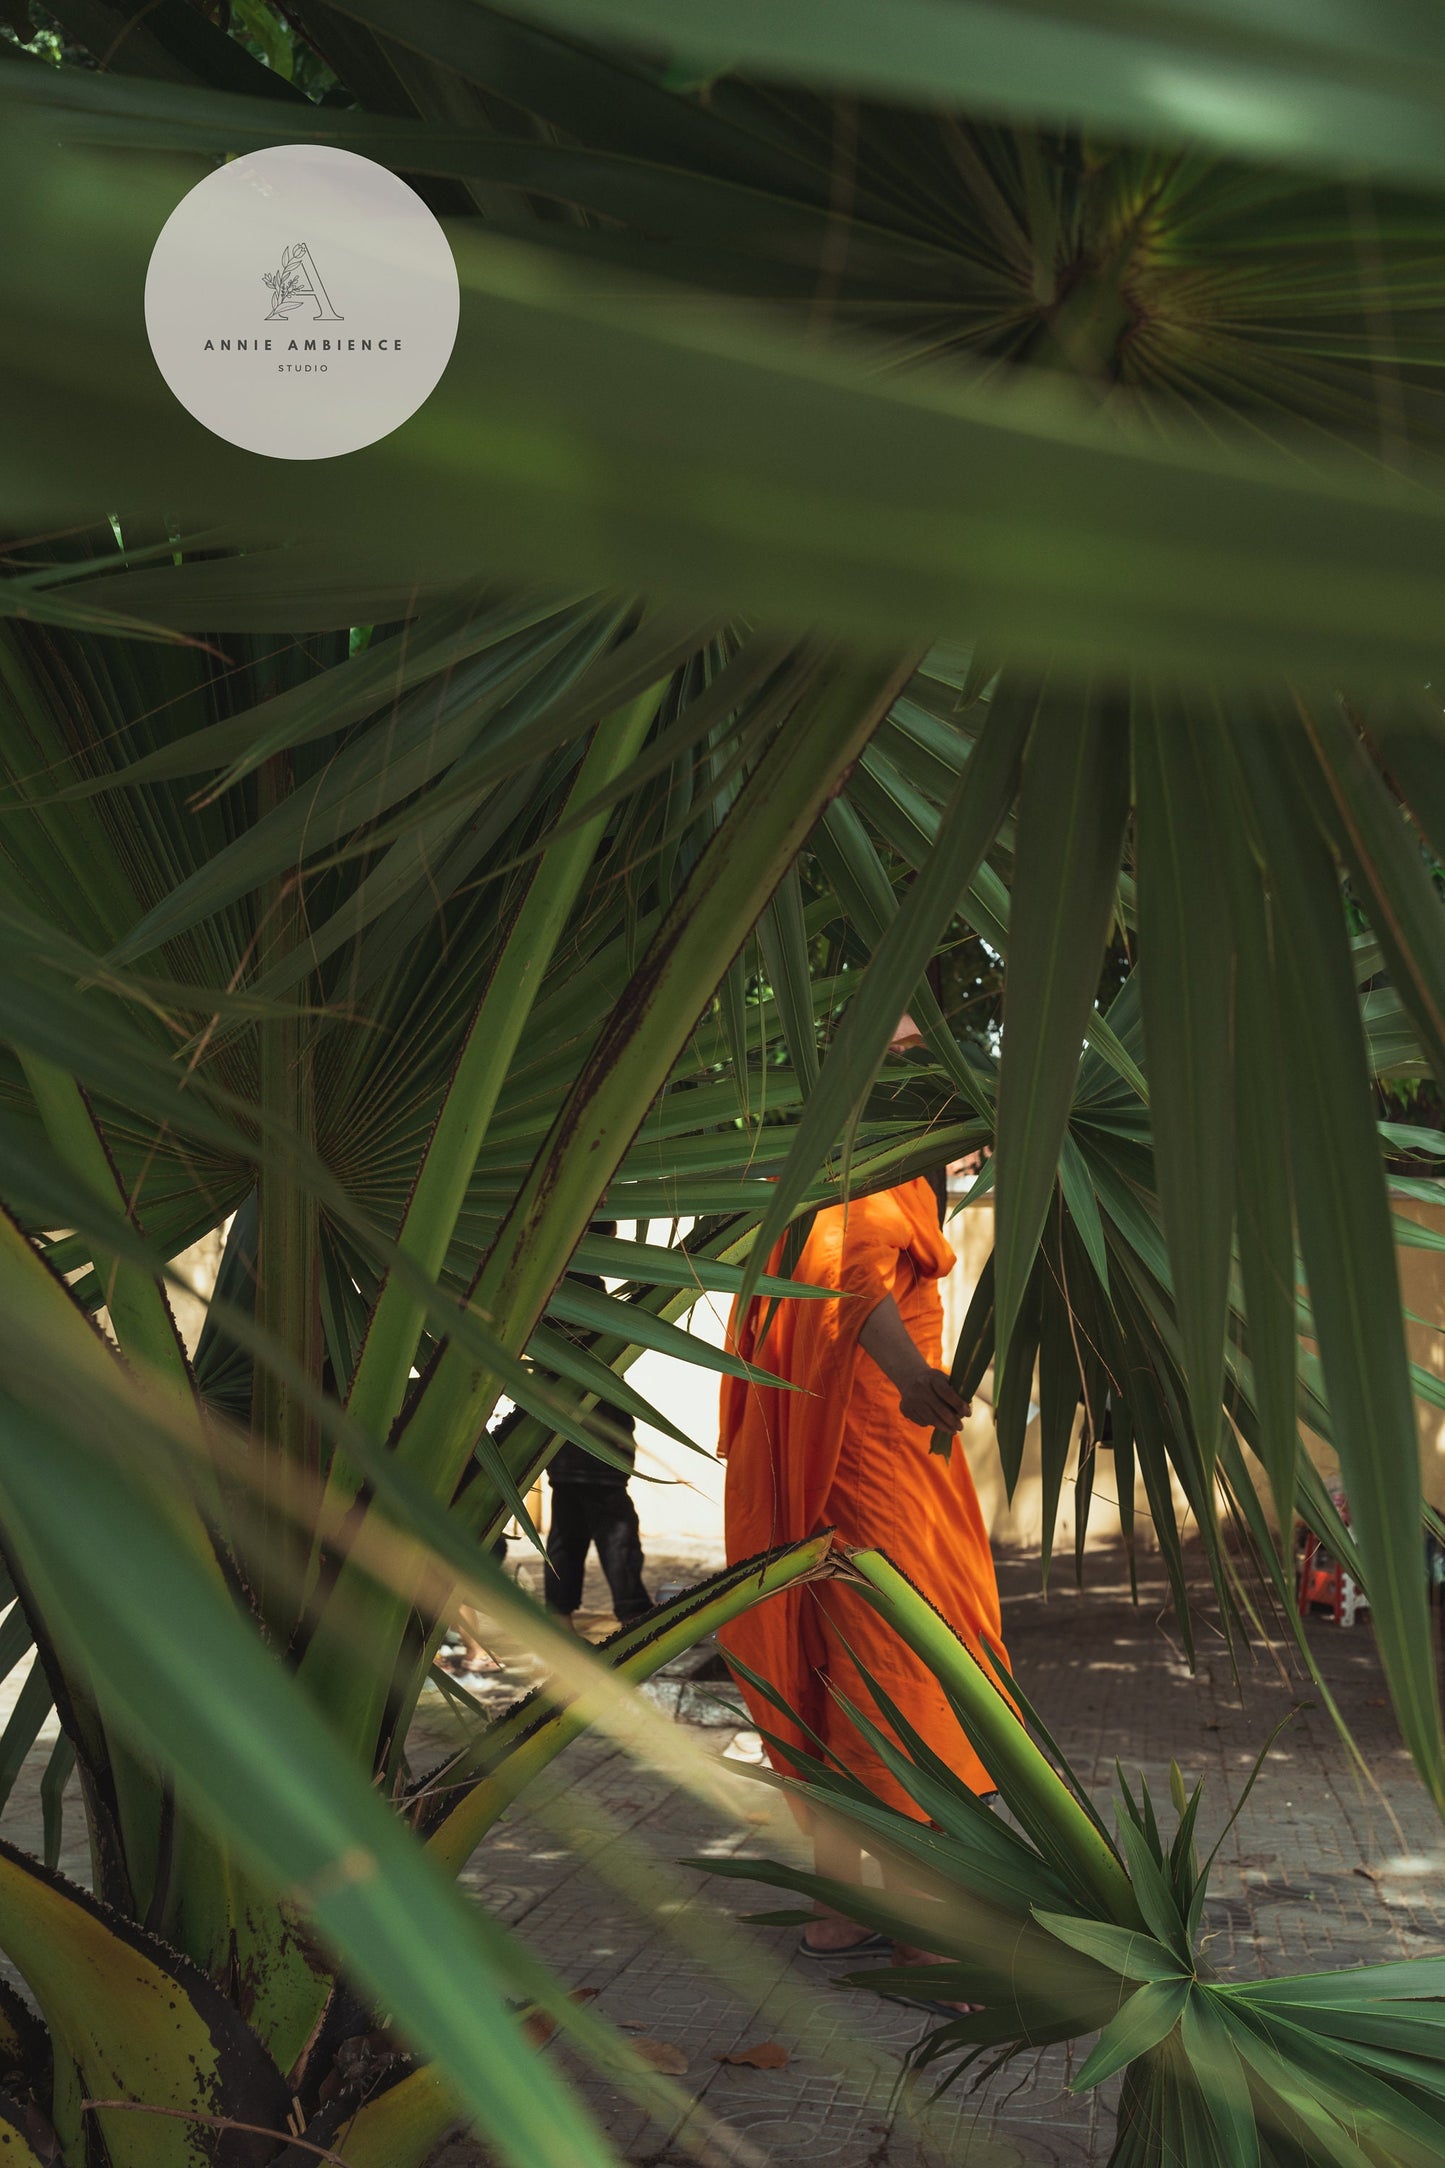 Cambodia Monk Photography Culture Photography Travel Print Cambodian Art Lifestyle Print Asia Photography Cambodia Buddhism Photo Asia Monk